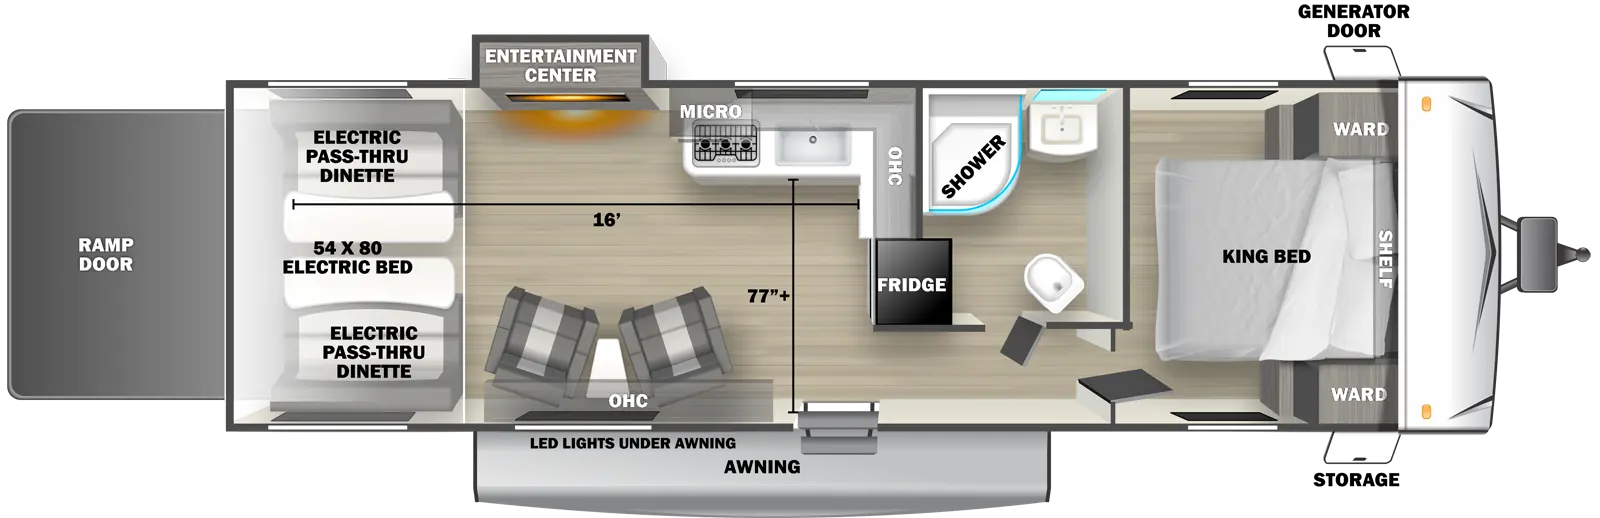 The 2700RLS travel trailer has 1 slide out on the off-door side, 1 entry door and 1 rear ramp door. Exterior features include an awning with LED lights, front door side storage and front off-door side generator door. Interior layout from front to back includes: front bedroom with foot-facing King bed, shelf over the bed, and front corner wardrobes; off-door side bathroom with shower, linen storage, toilet and single sink vanity; off-door side L-shaped kitchen countertop with stovetop, overhead microwave and cabinets, sink, and rear facing refrigerator; 2 door side recliners with end table; off-door side slideout holding an entertainment center; and rear 54 x 80 electric bed over electric pass-through dinette. Cargo length from rear of unit to kitchen countertop is 16 ft. Cargo width from kitchen countertop to door side wall is 77 inches.